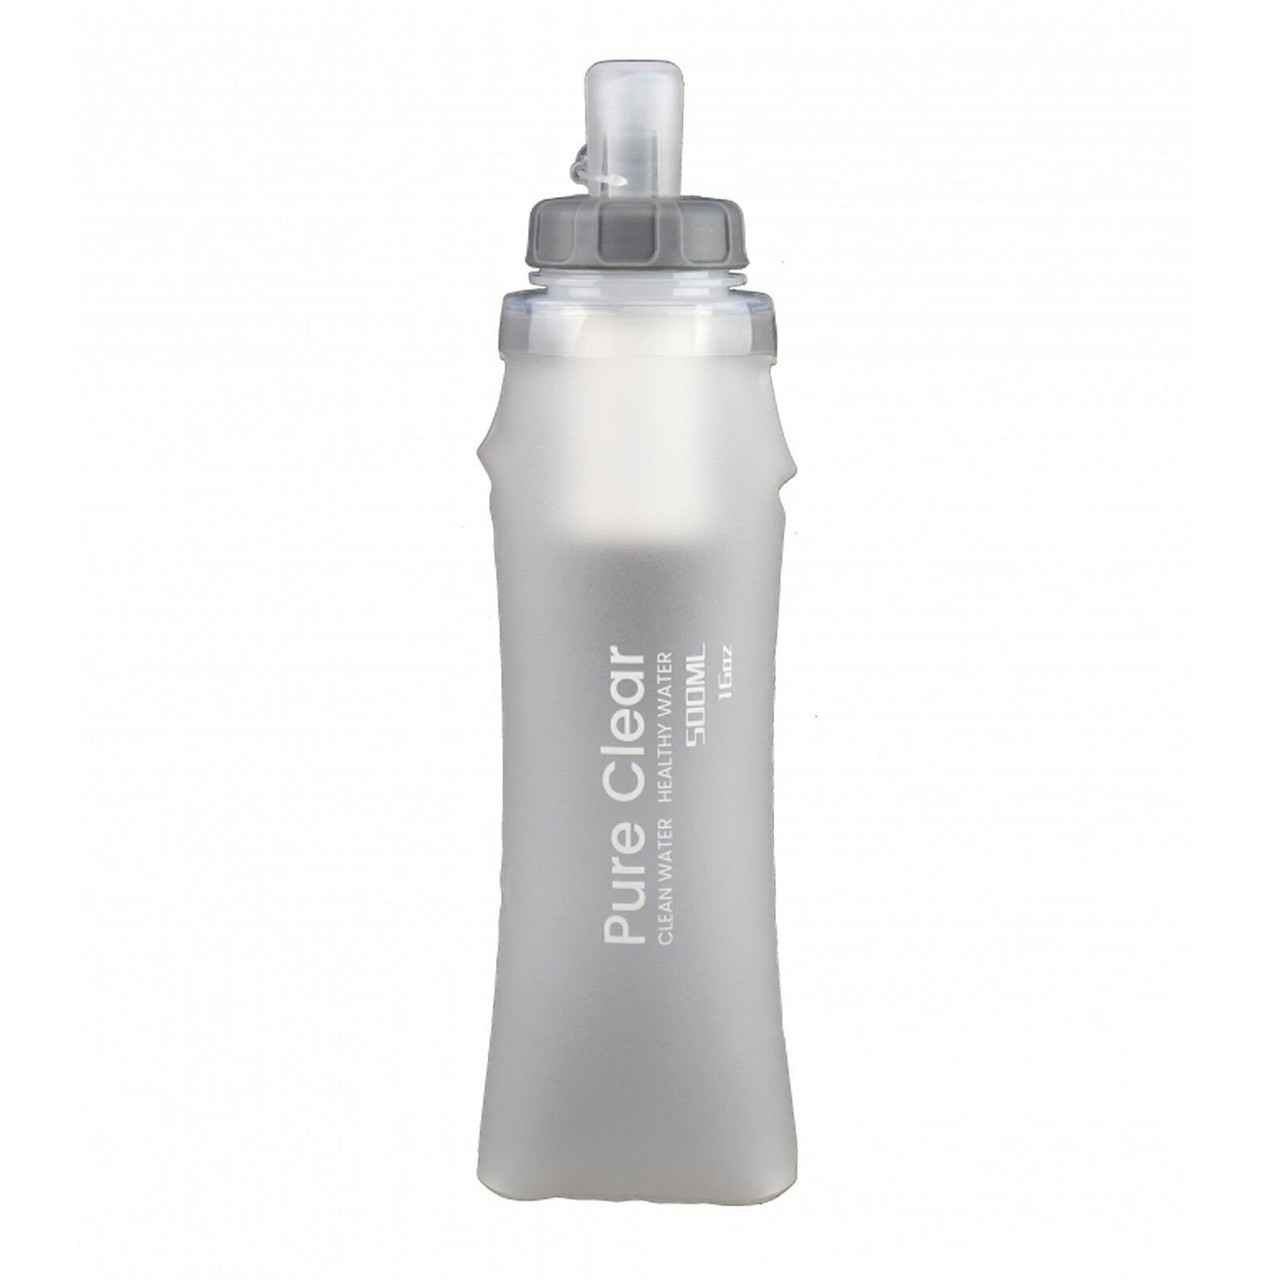 Purewell Collapsible Water Filter Bag - Water Bottles